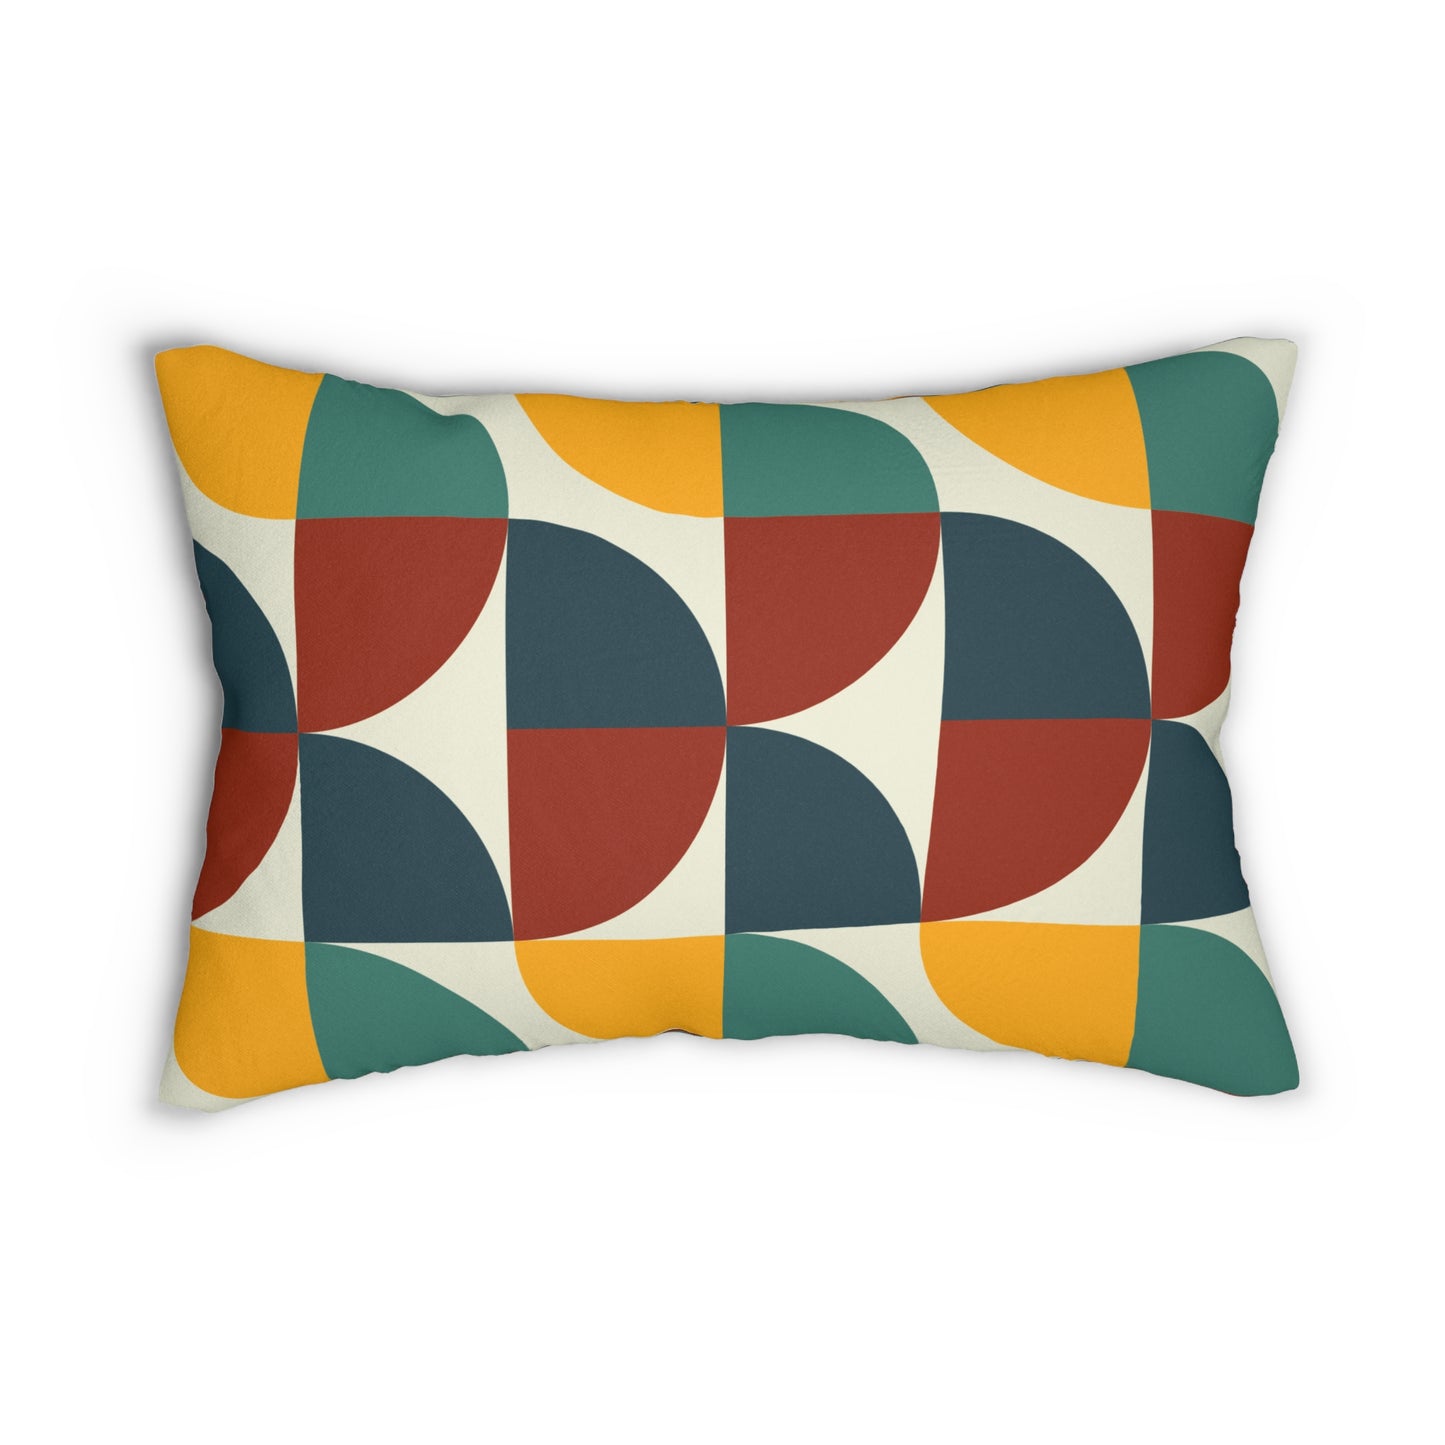 70's Groovy Geometric Accent Pillow